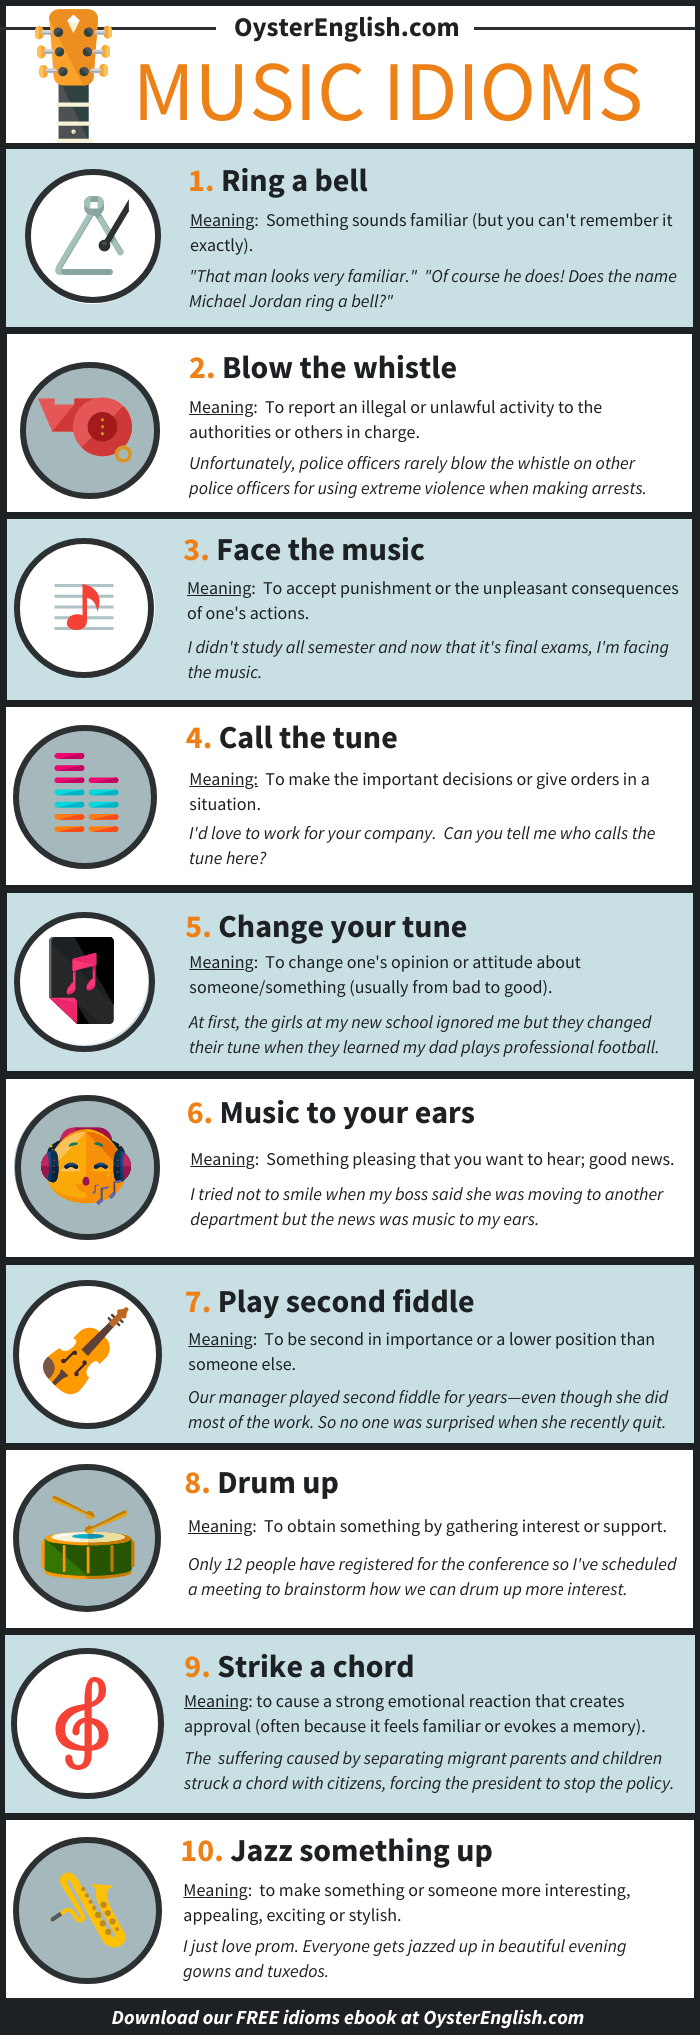 An infographic showing the 10 music idioms listed on this webpage with definitions and sentence examples